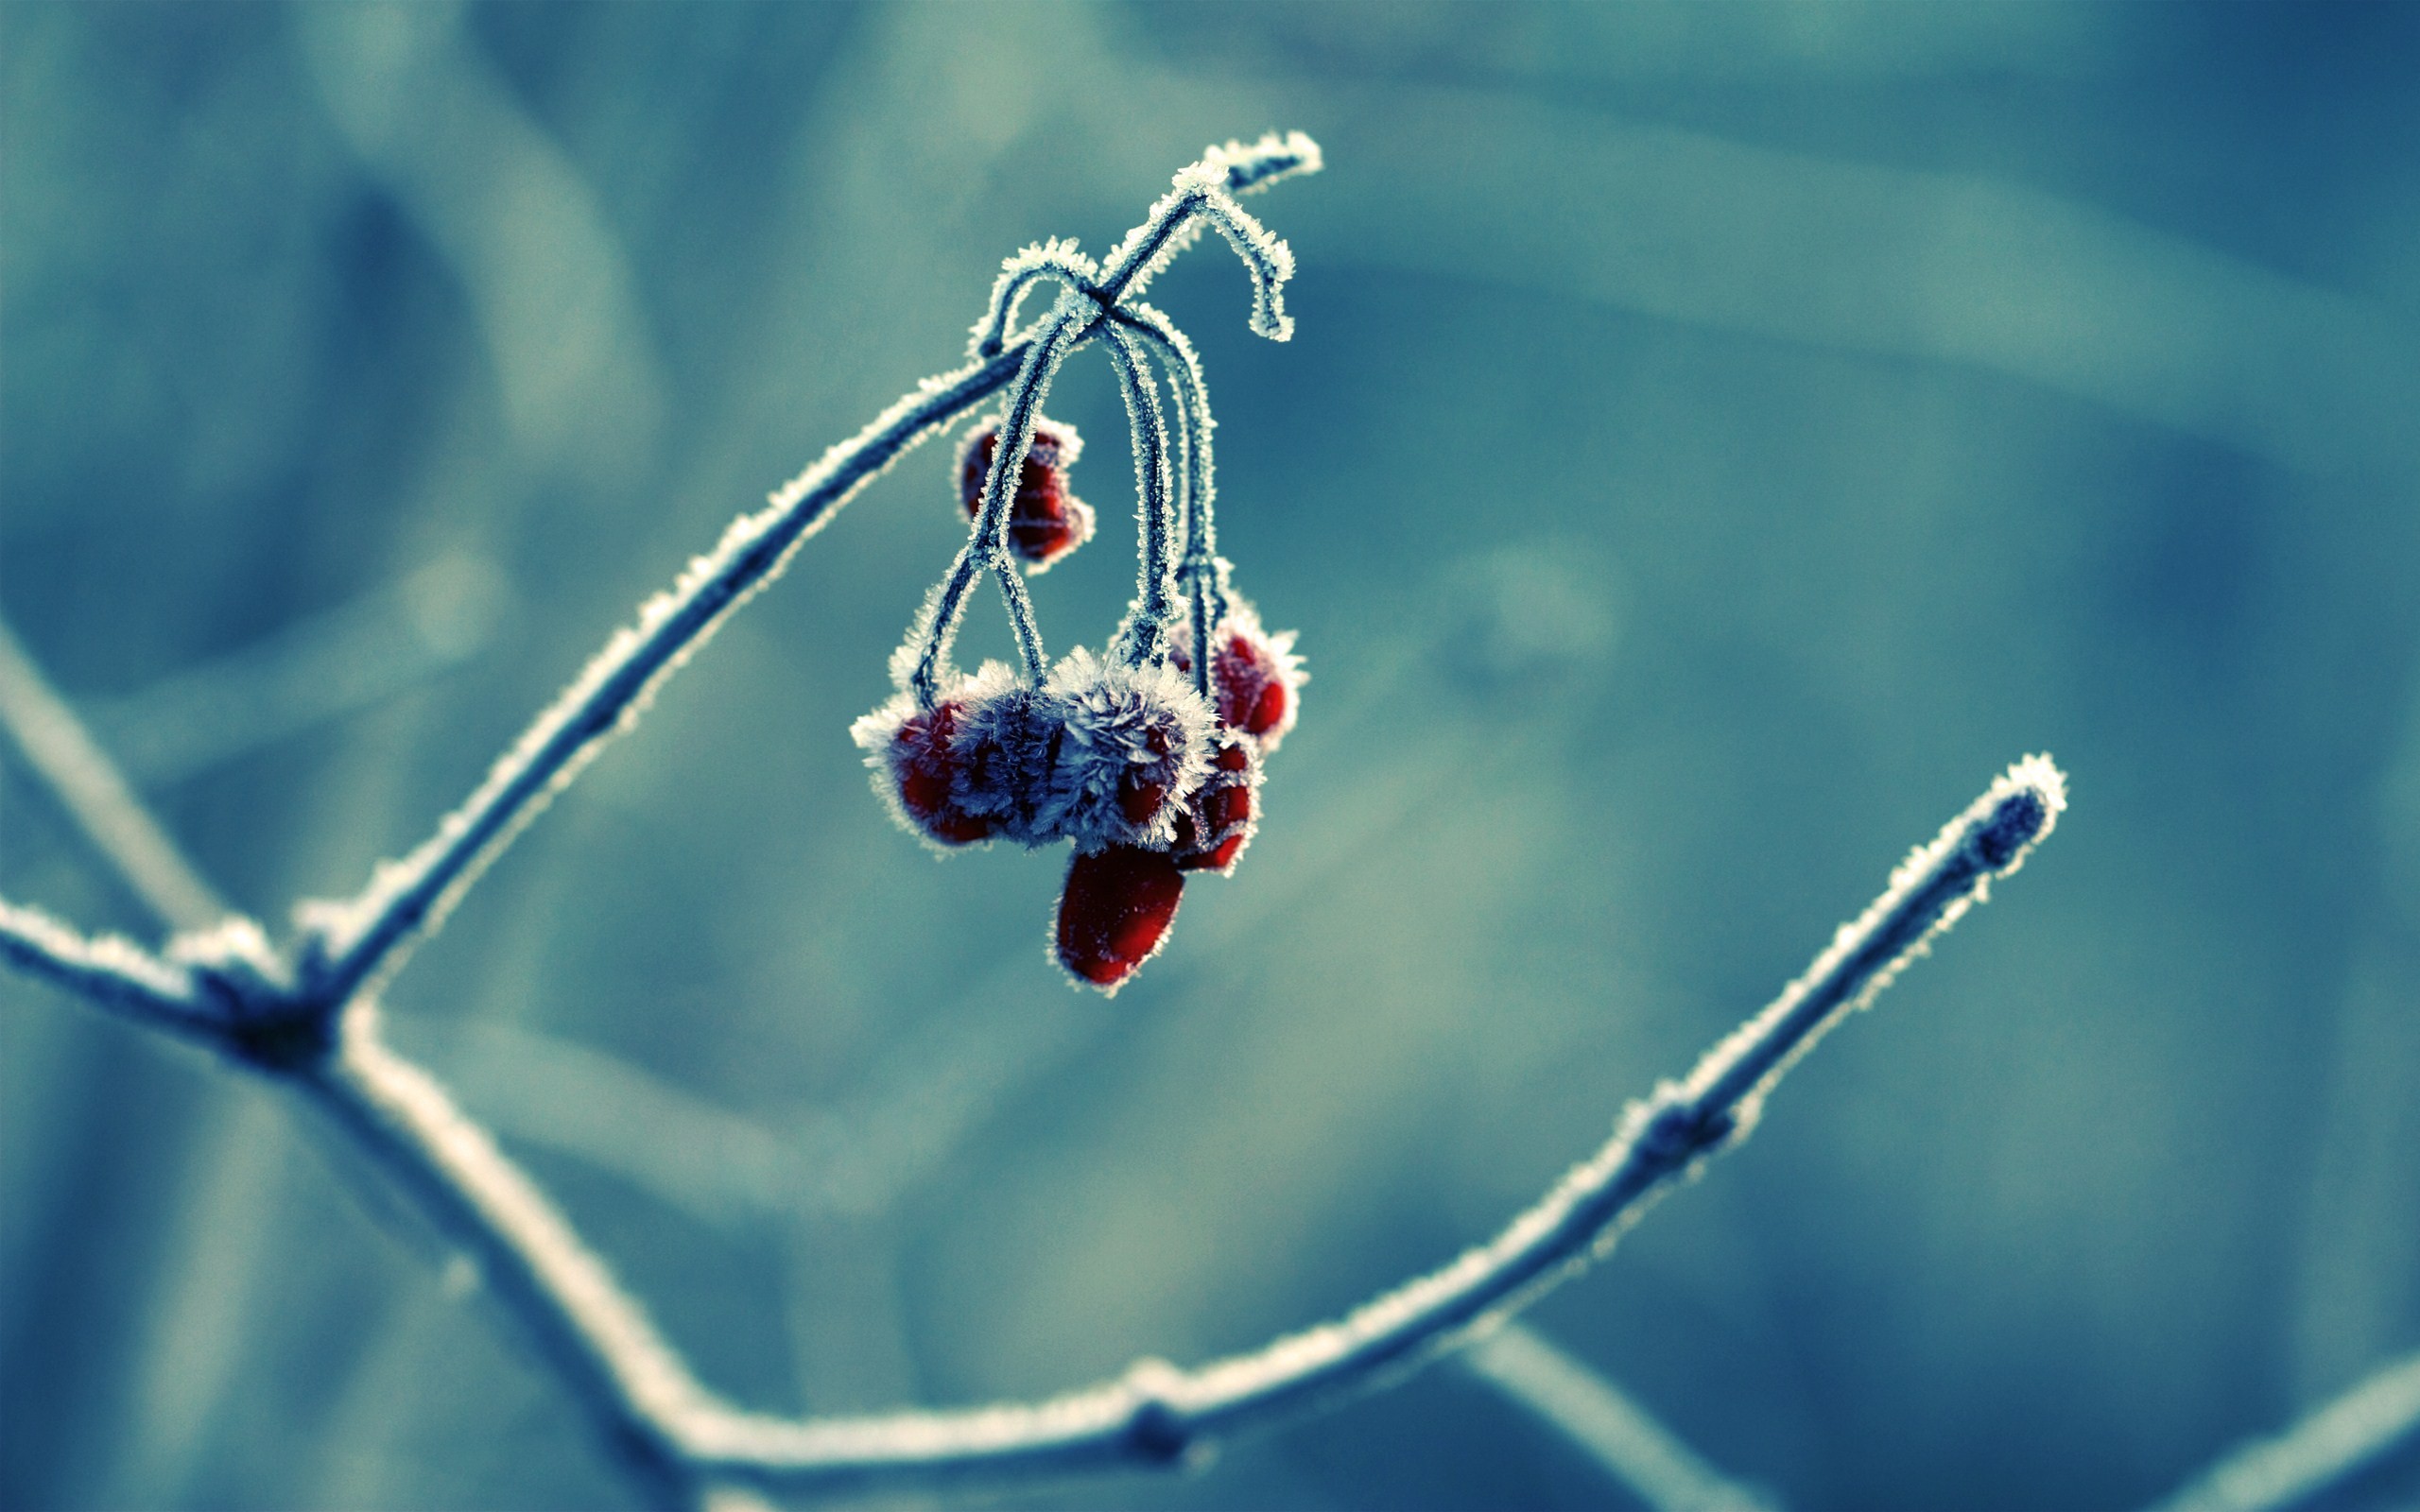 General 2560x1600 winter frost macro berries branch nature plants twigs cold